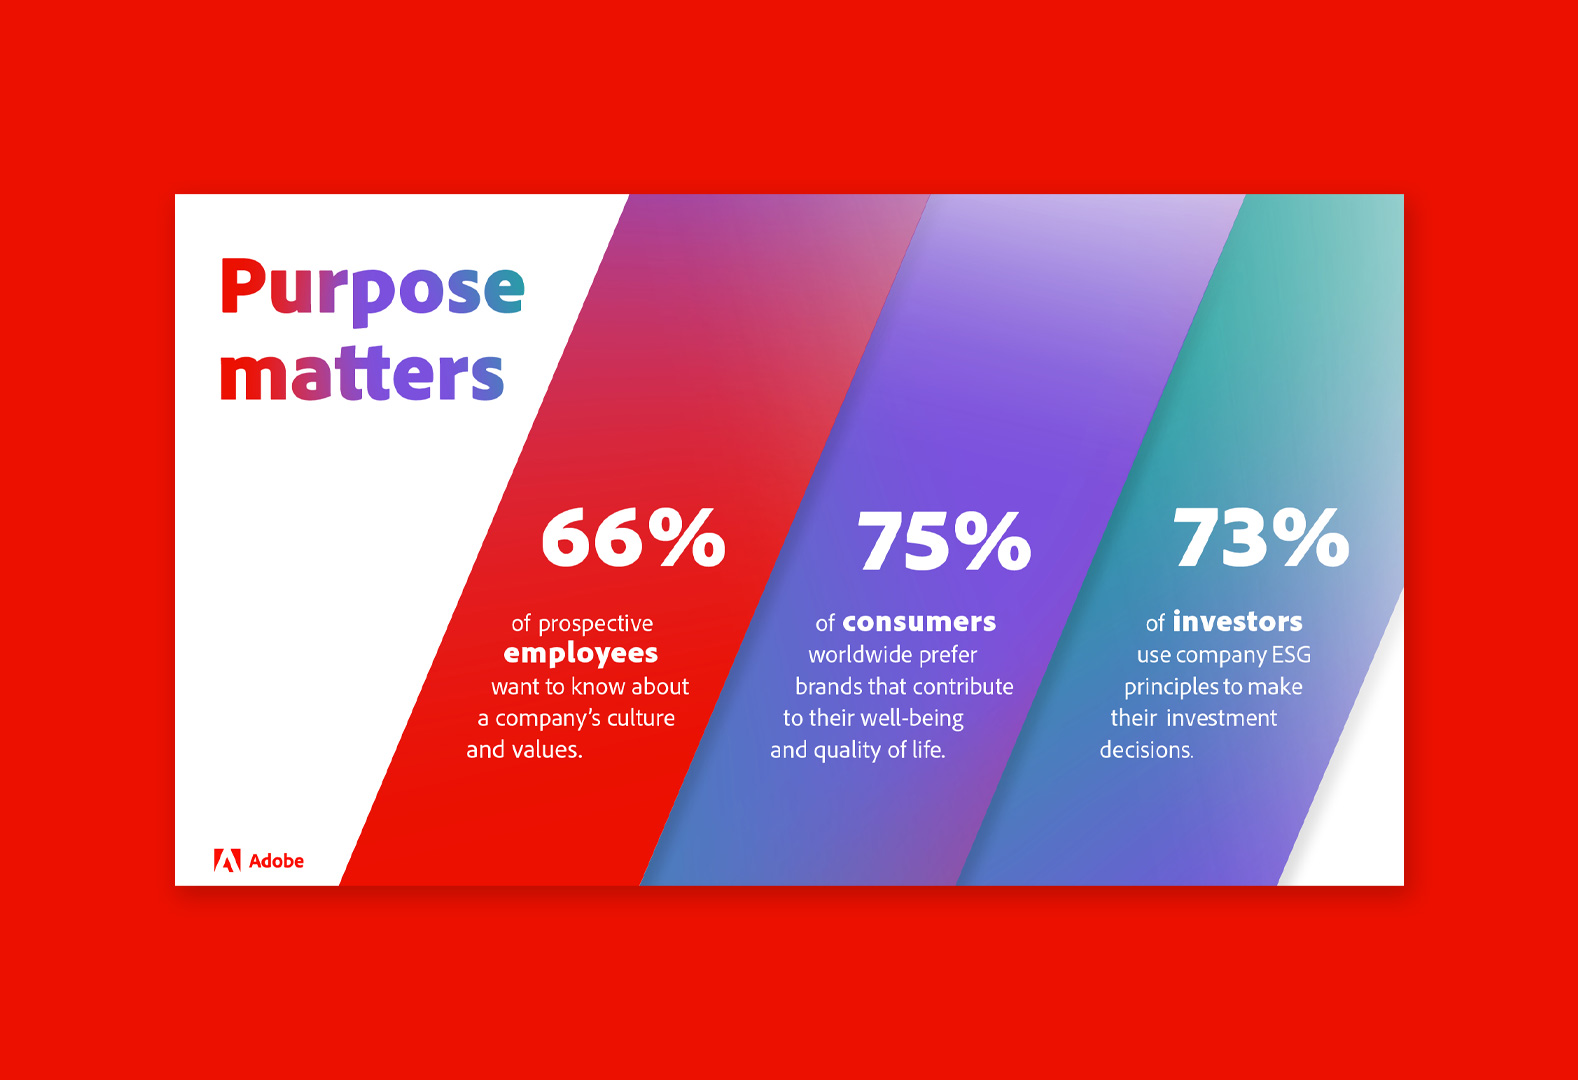 Infographic showing that purpose matters to employees, customers, and investors